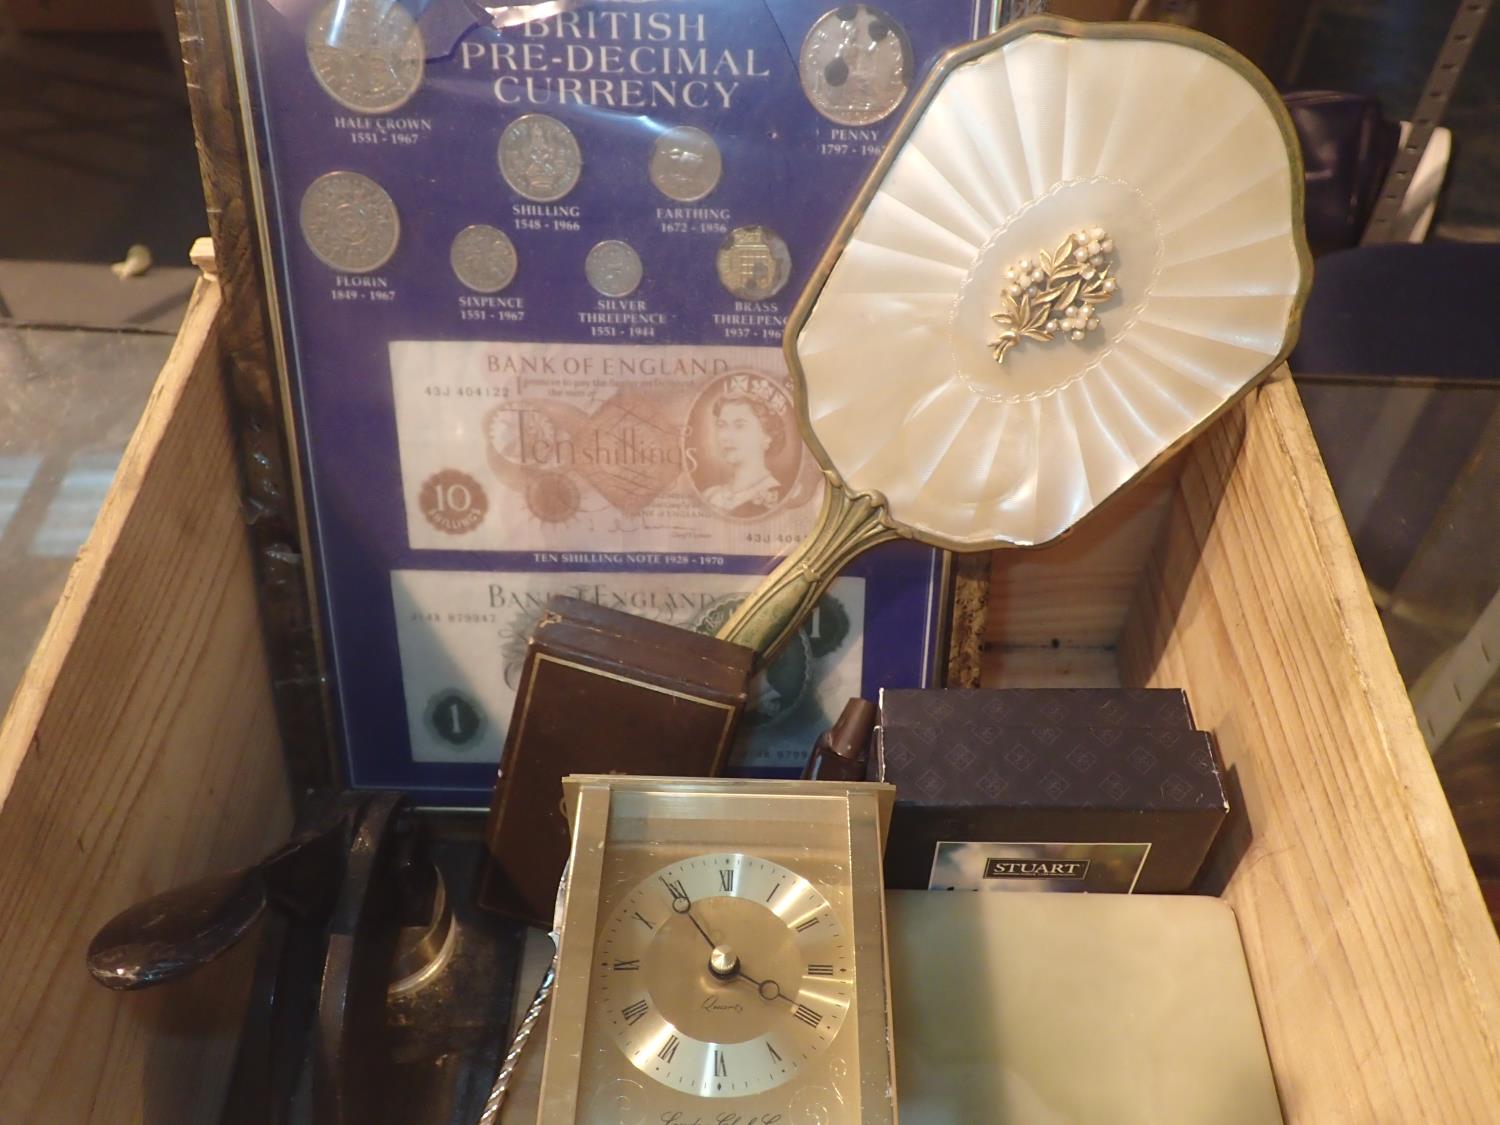 Collectables to include a framed pre decimal currency display, boxed Colibri lighter, paper